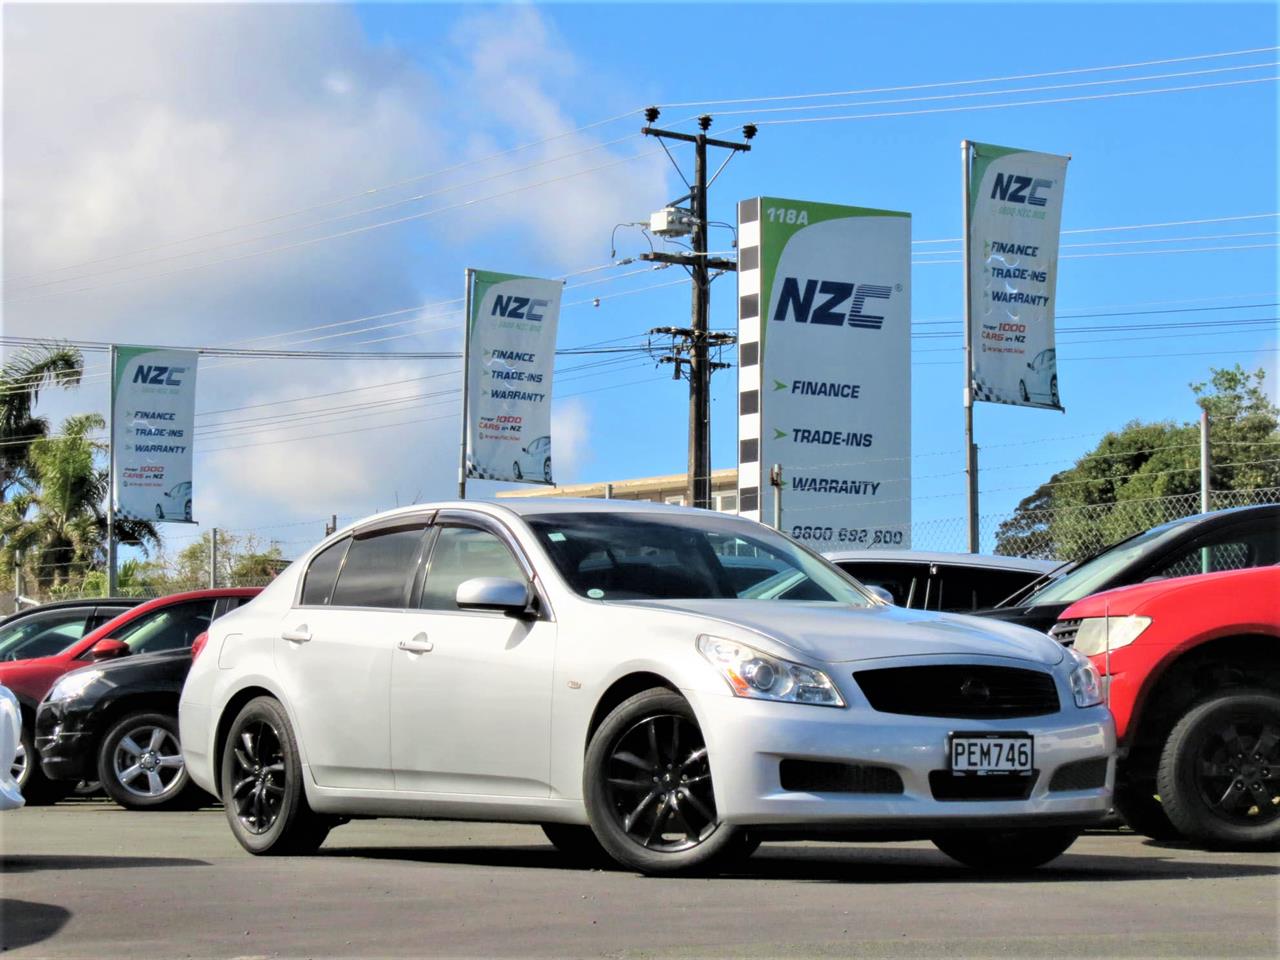 NZC 2007 Nissan Skyline just arrived to Auckland